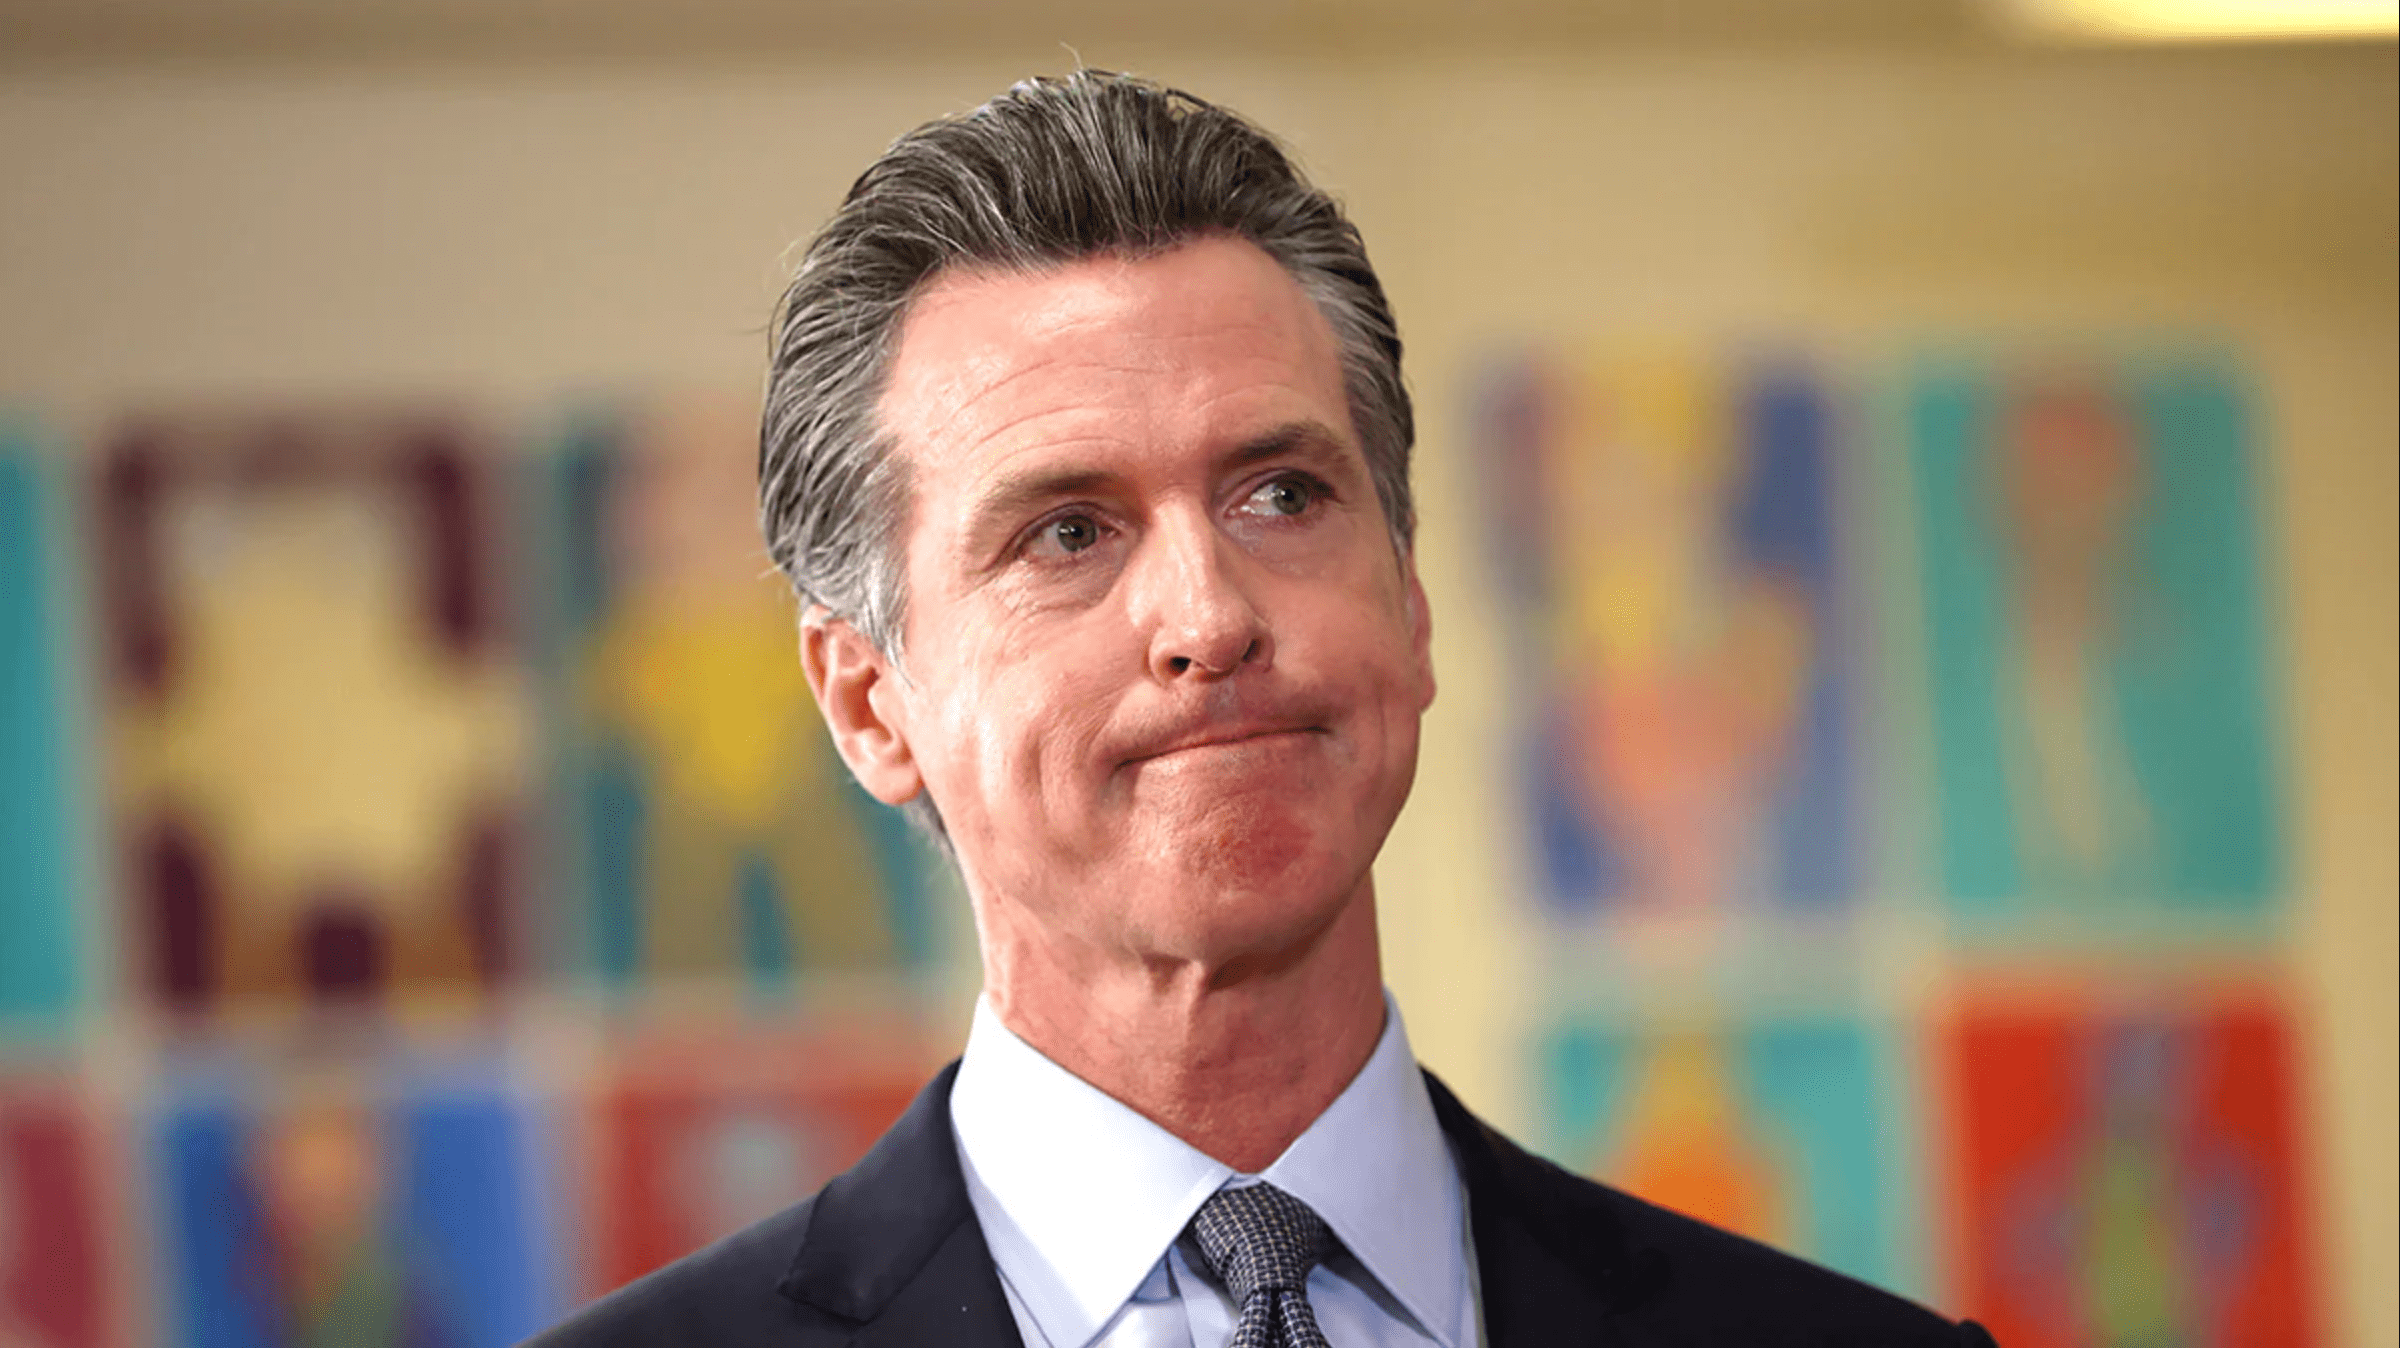 California Governor Gavin Newsom Mocked & Ridiculed After In-Laws Donate $5,000 to the Reelection Campaign for FL Governor Ron DeSantis